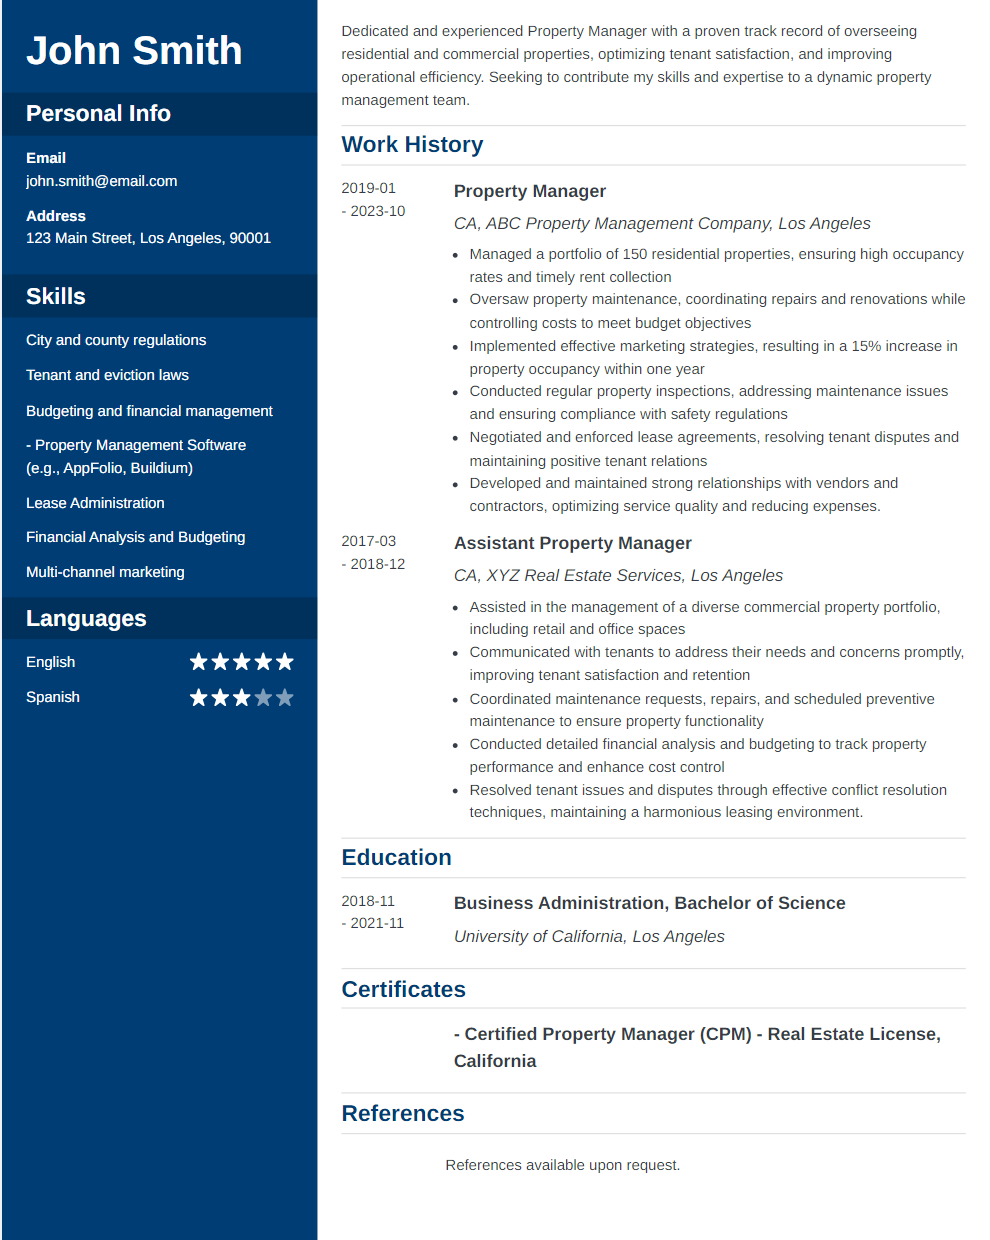 Assistant property manager resume image